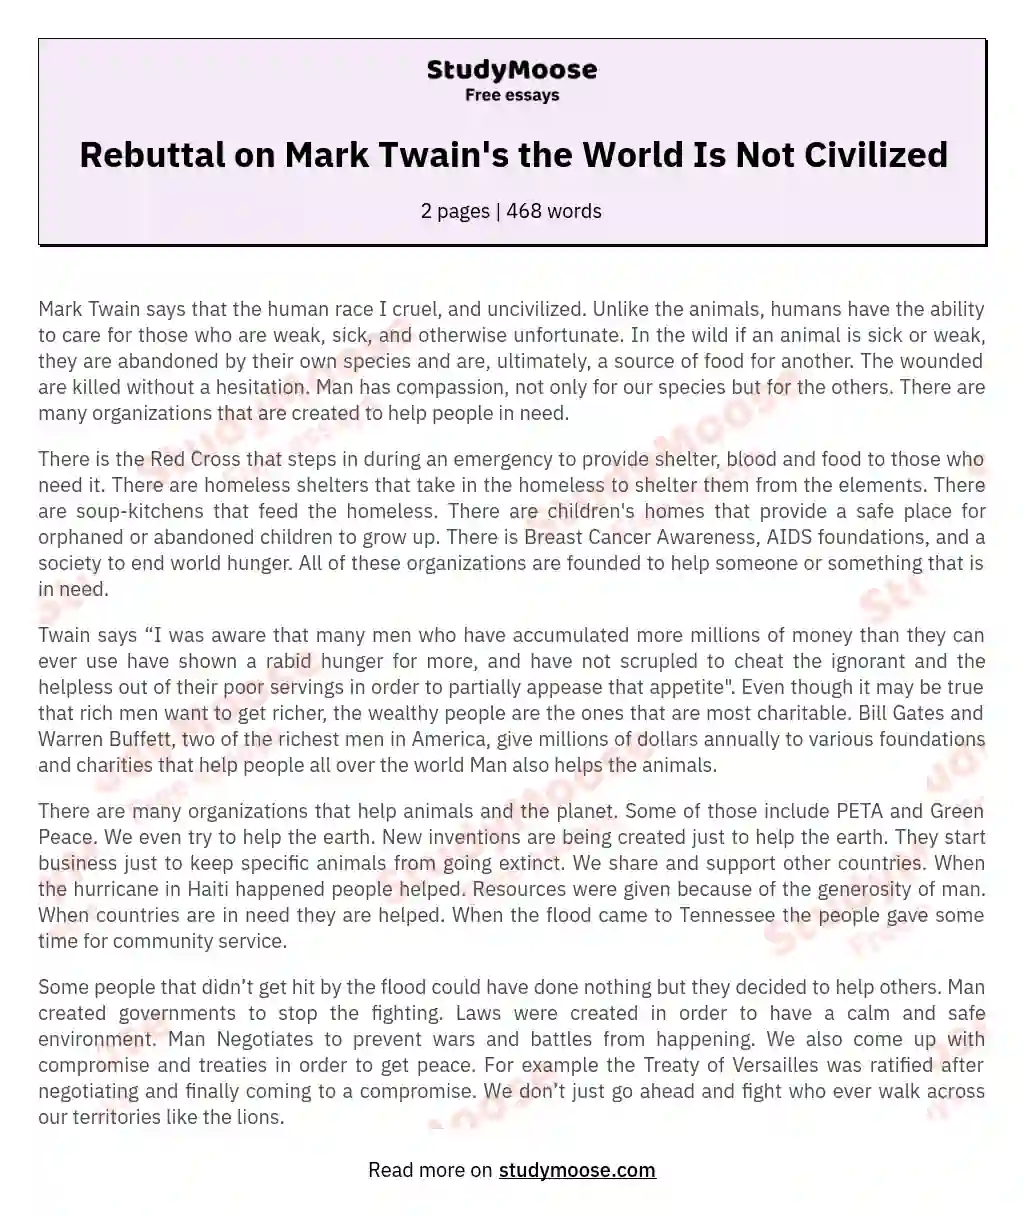 Rebuttal on Mark Twain's the World Is Not Civilized essay